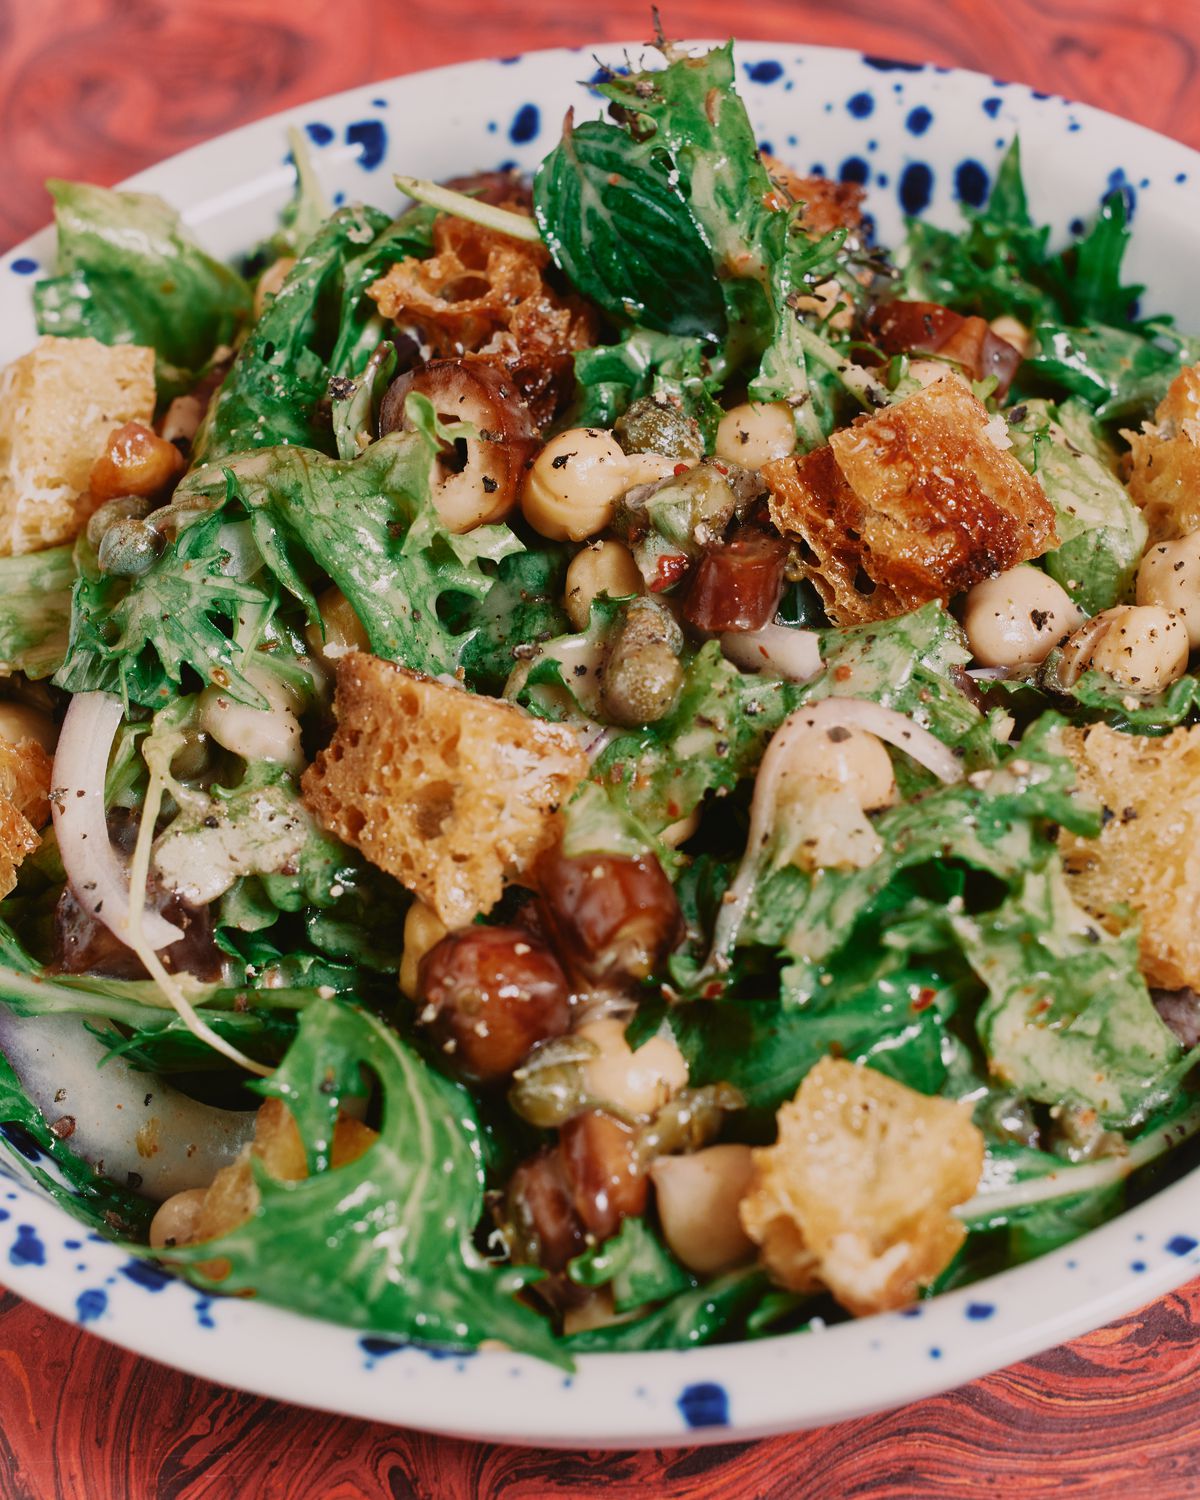 A close-up photo of a well-dressed green salad with croutons and chickpeas visible.